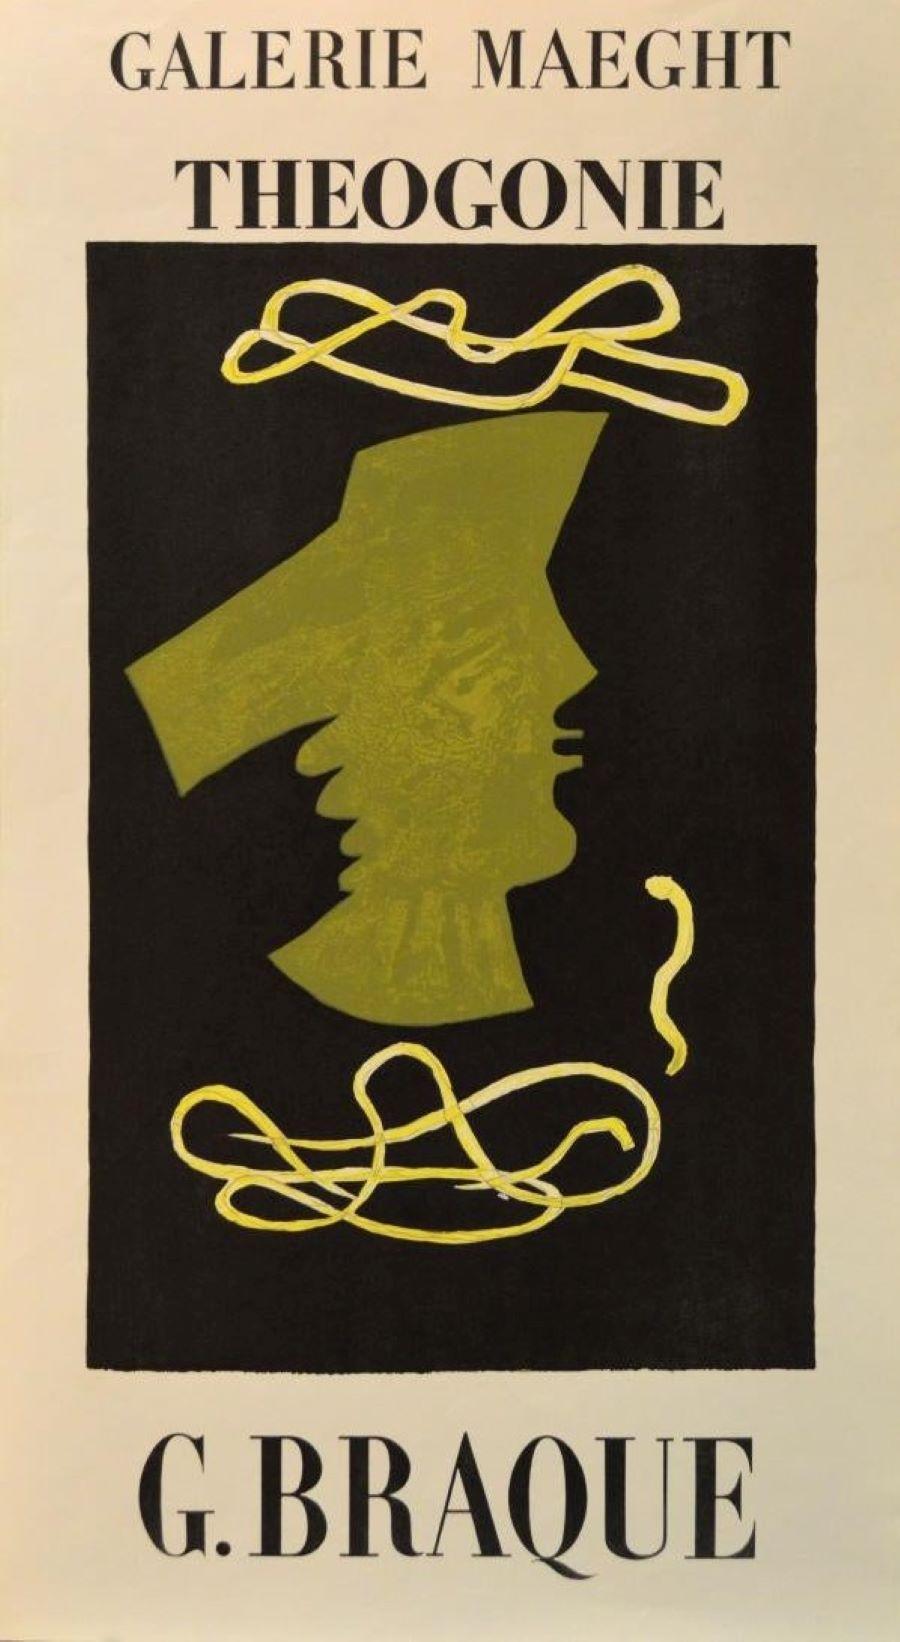 (after) Georges Braque Portrait Print - Galerie Maeght, Theogonie, Print featuring the work of Georges Braque